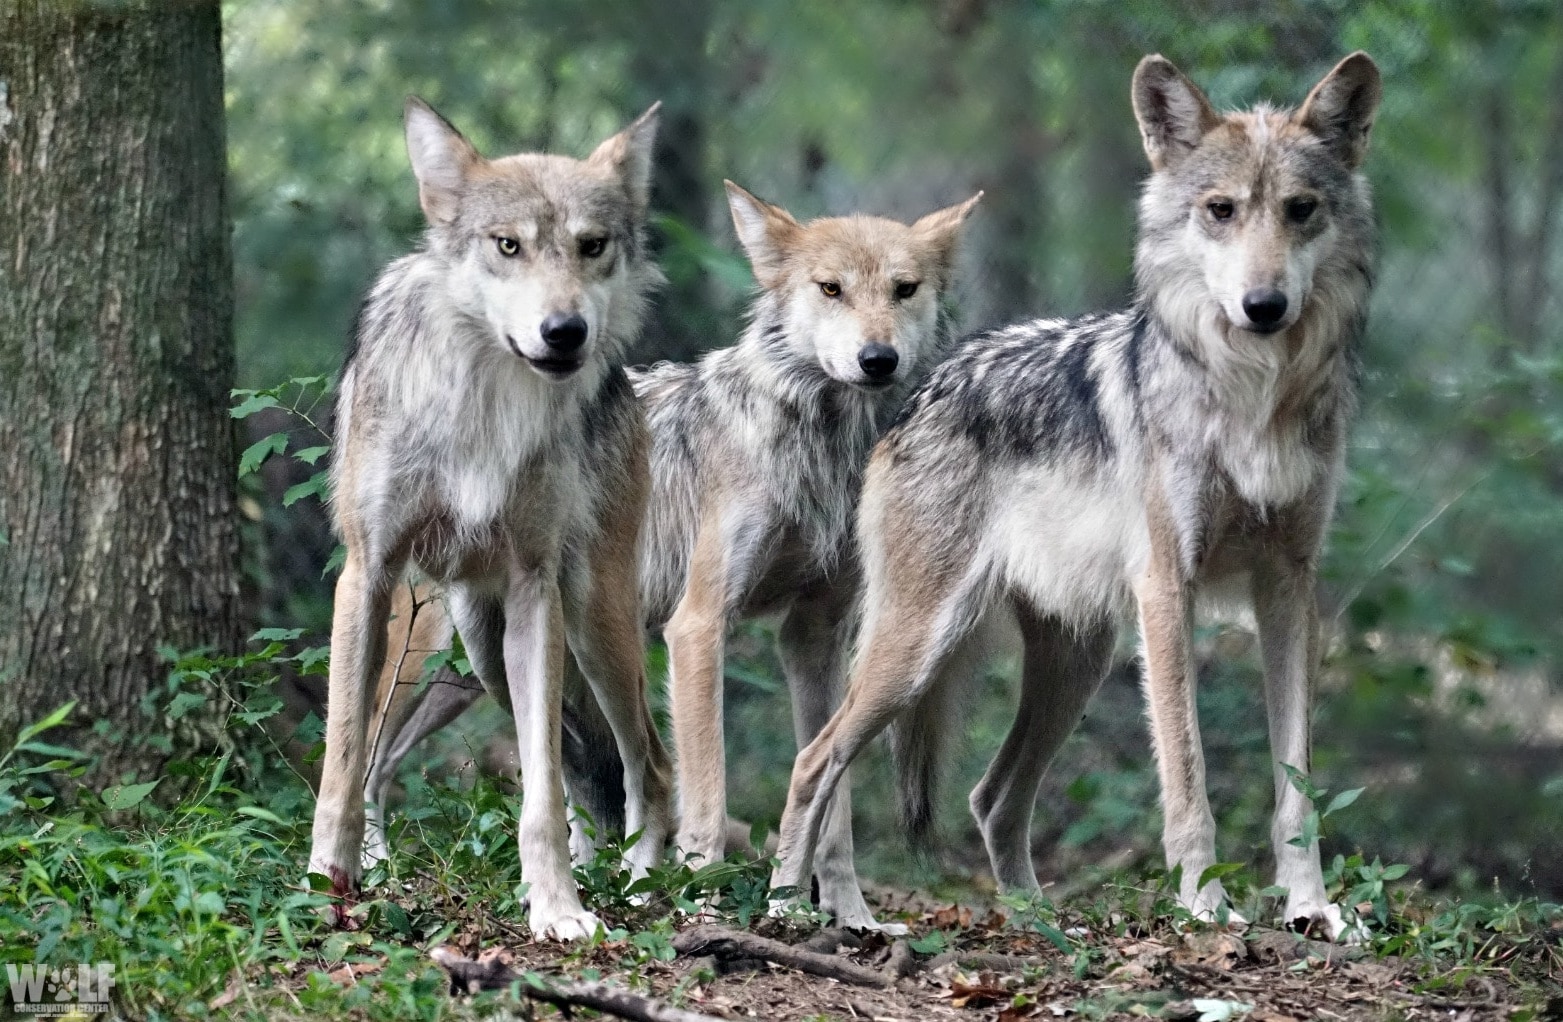 Wild Mexican Gray Wolf Population Grows Slightly, Intensive Recovery Efforts Still Needed